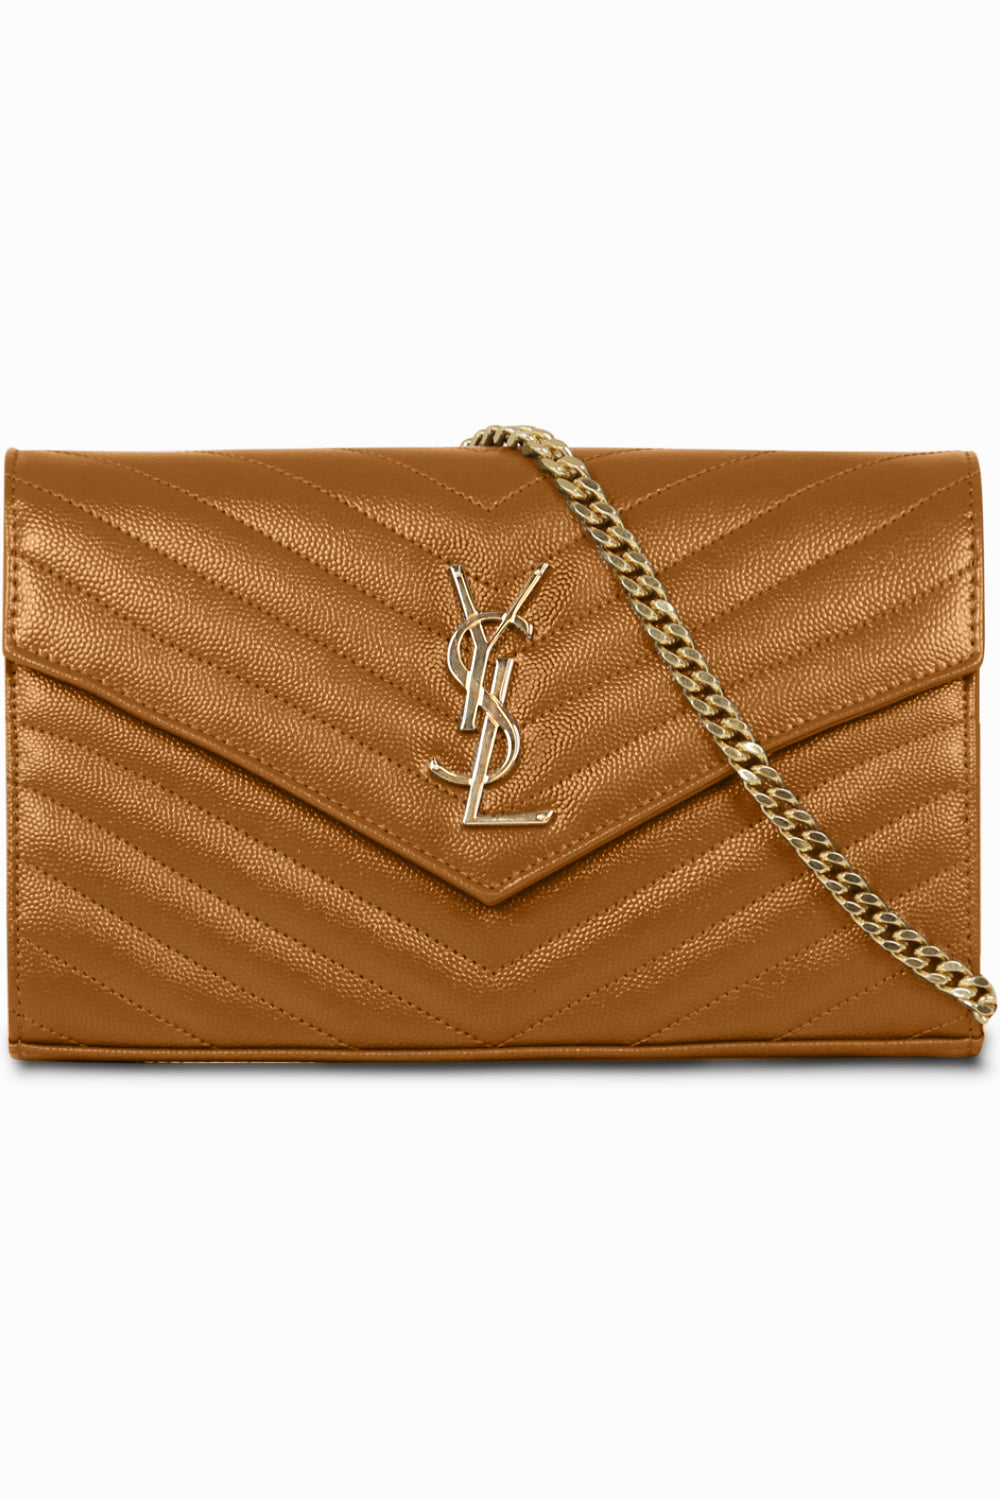 SAINT LAURENT BAGS BROWN MONOGRAMME QUILTED CHAIN WALLET | NATURAL DARK/GOLD